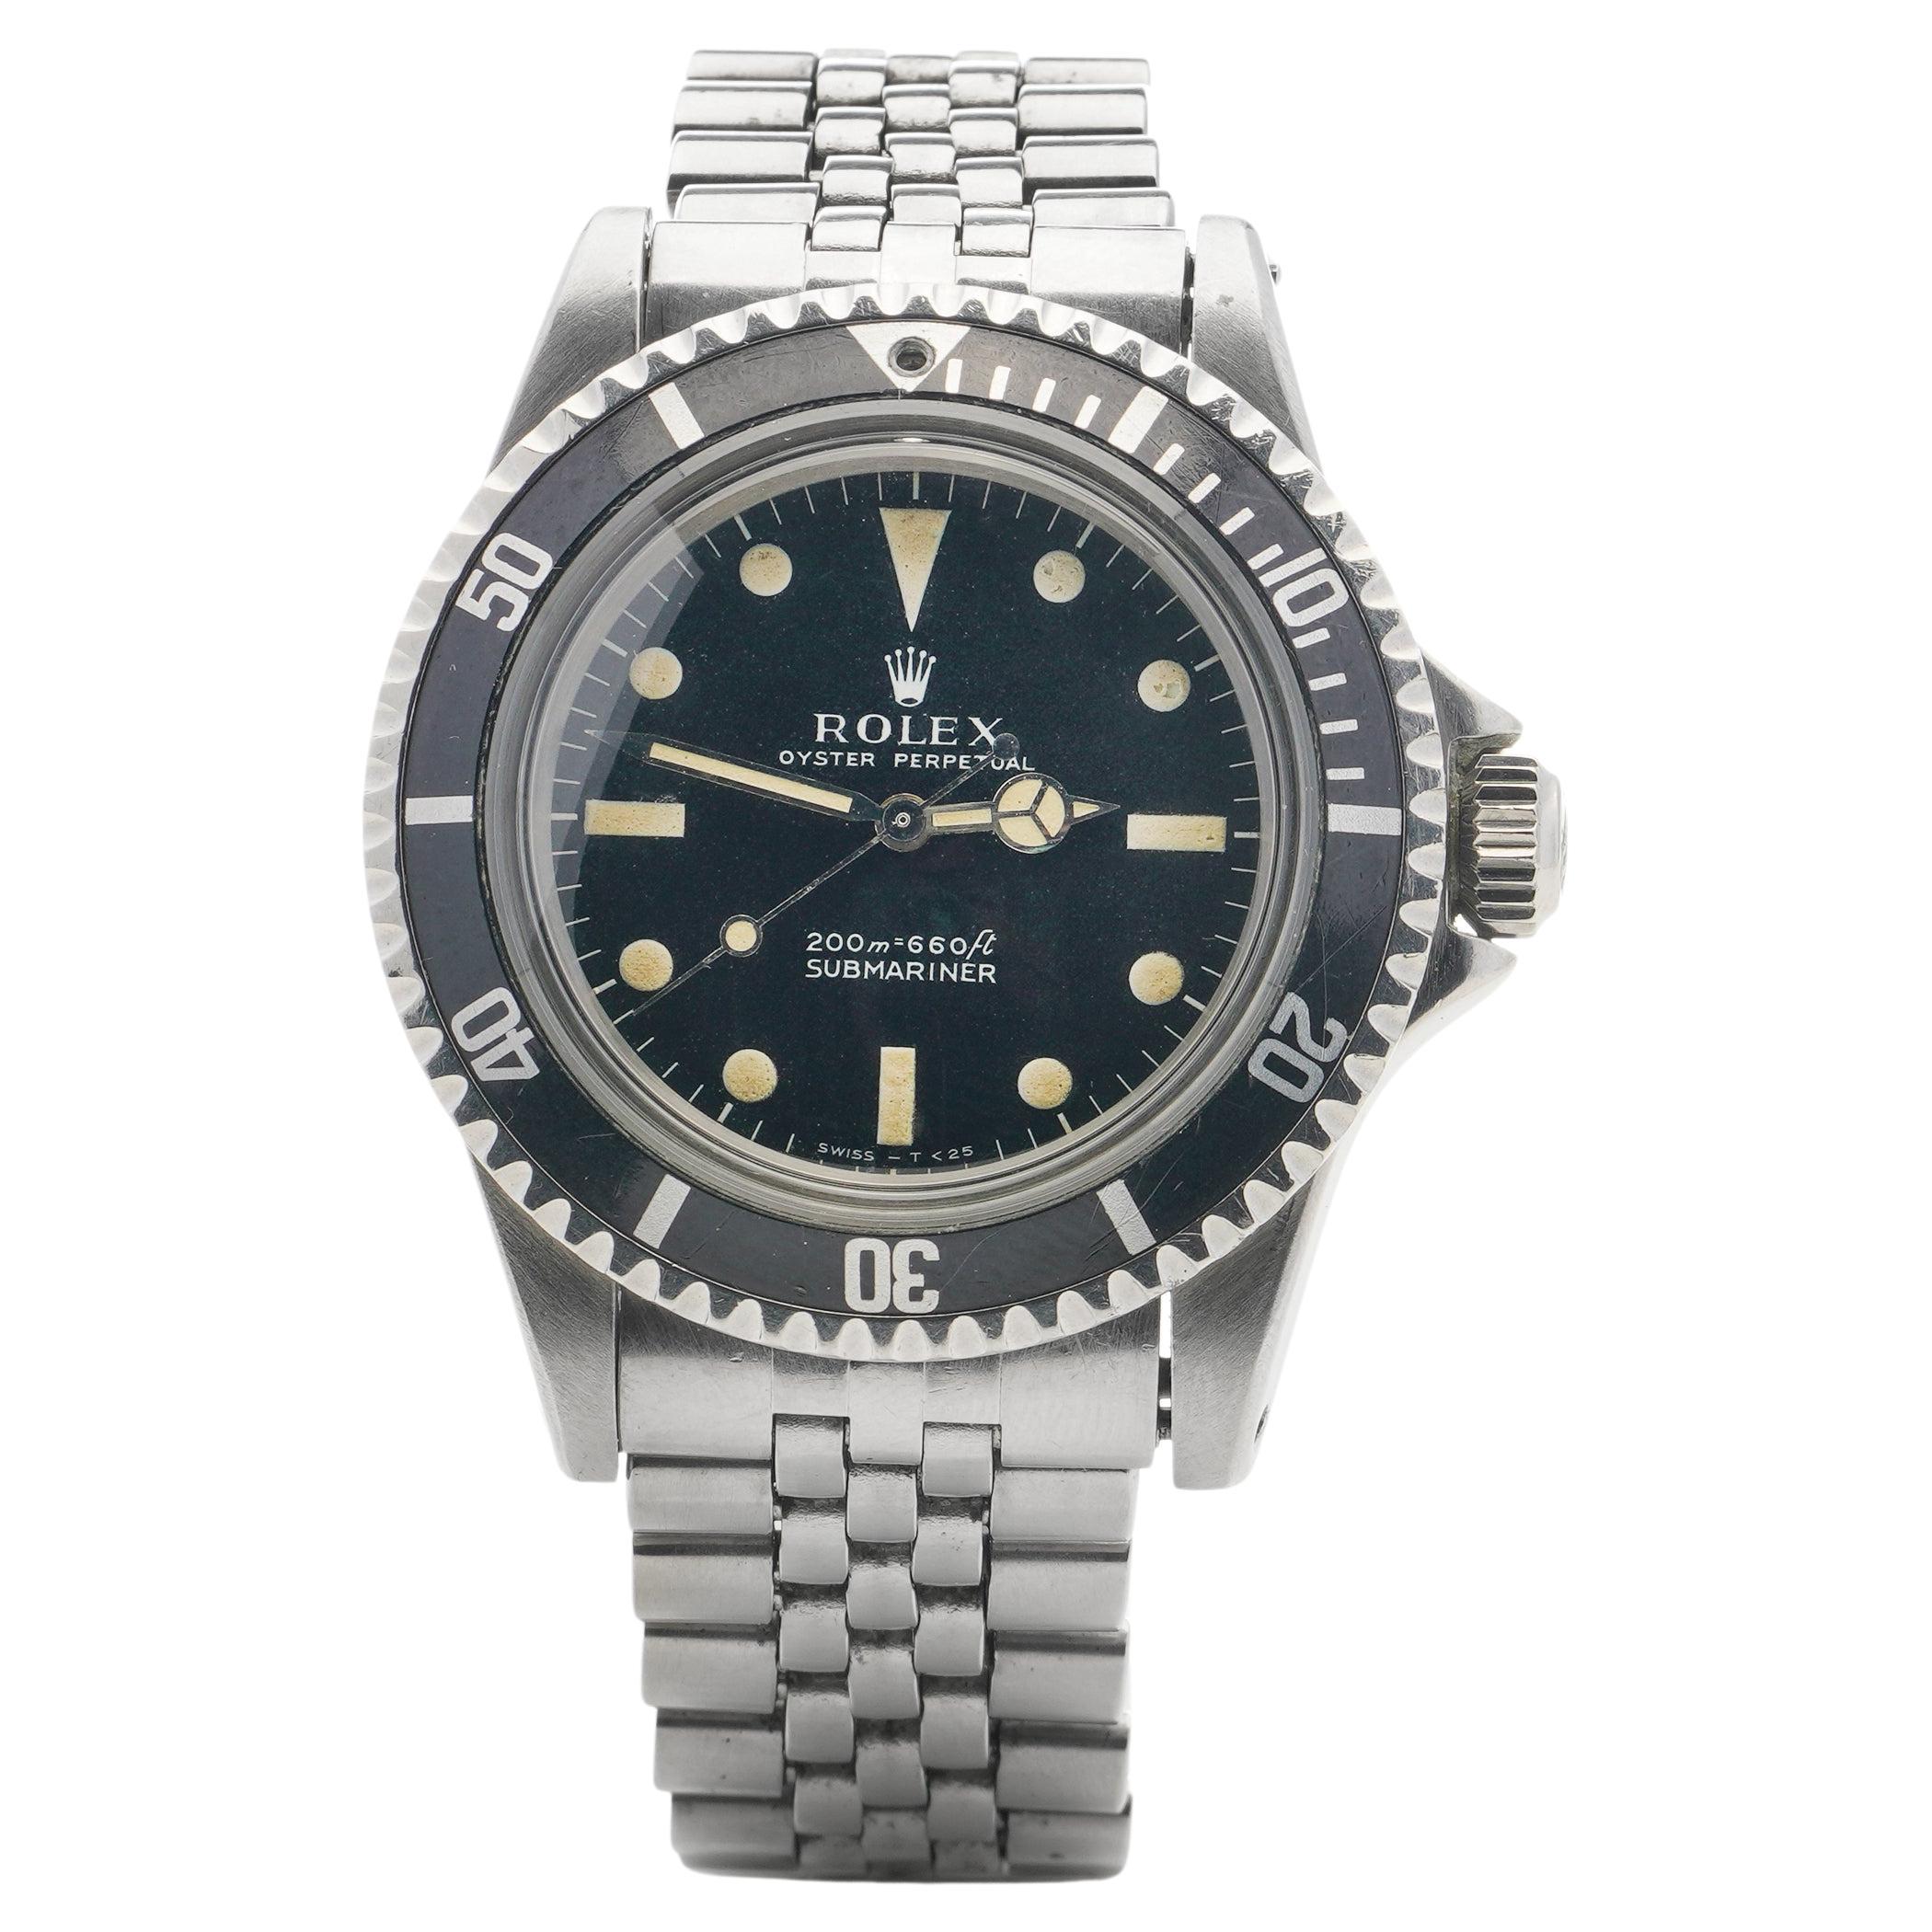 Rolex Oyster Perpetual Submariner, 5513, Stainless Steel Watch For Sale at  1stDibs | rolex submariner ref. 5513, when was the rolex submariner first  made, rolex 5513